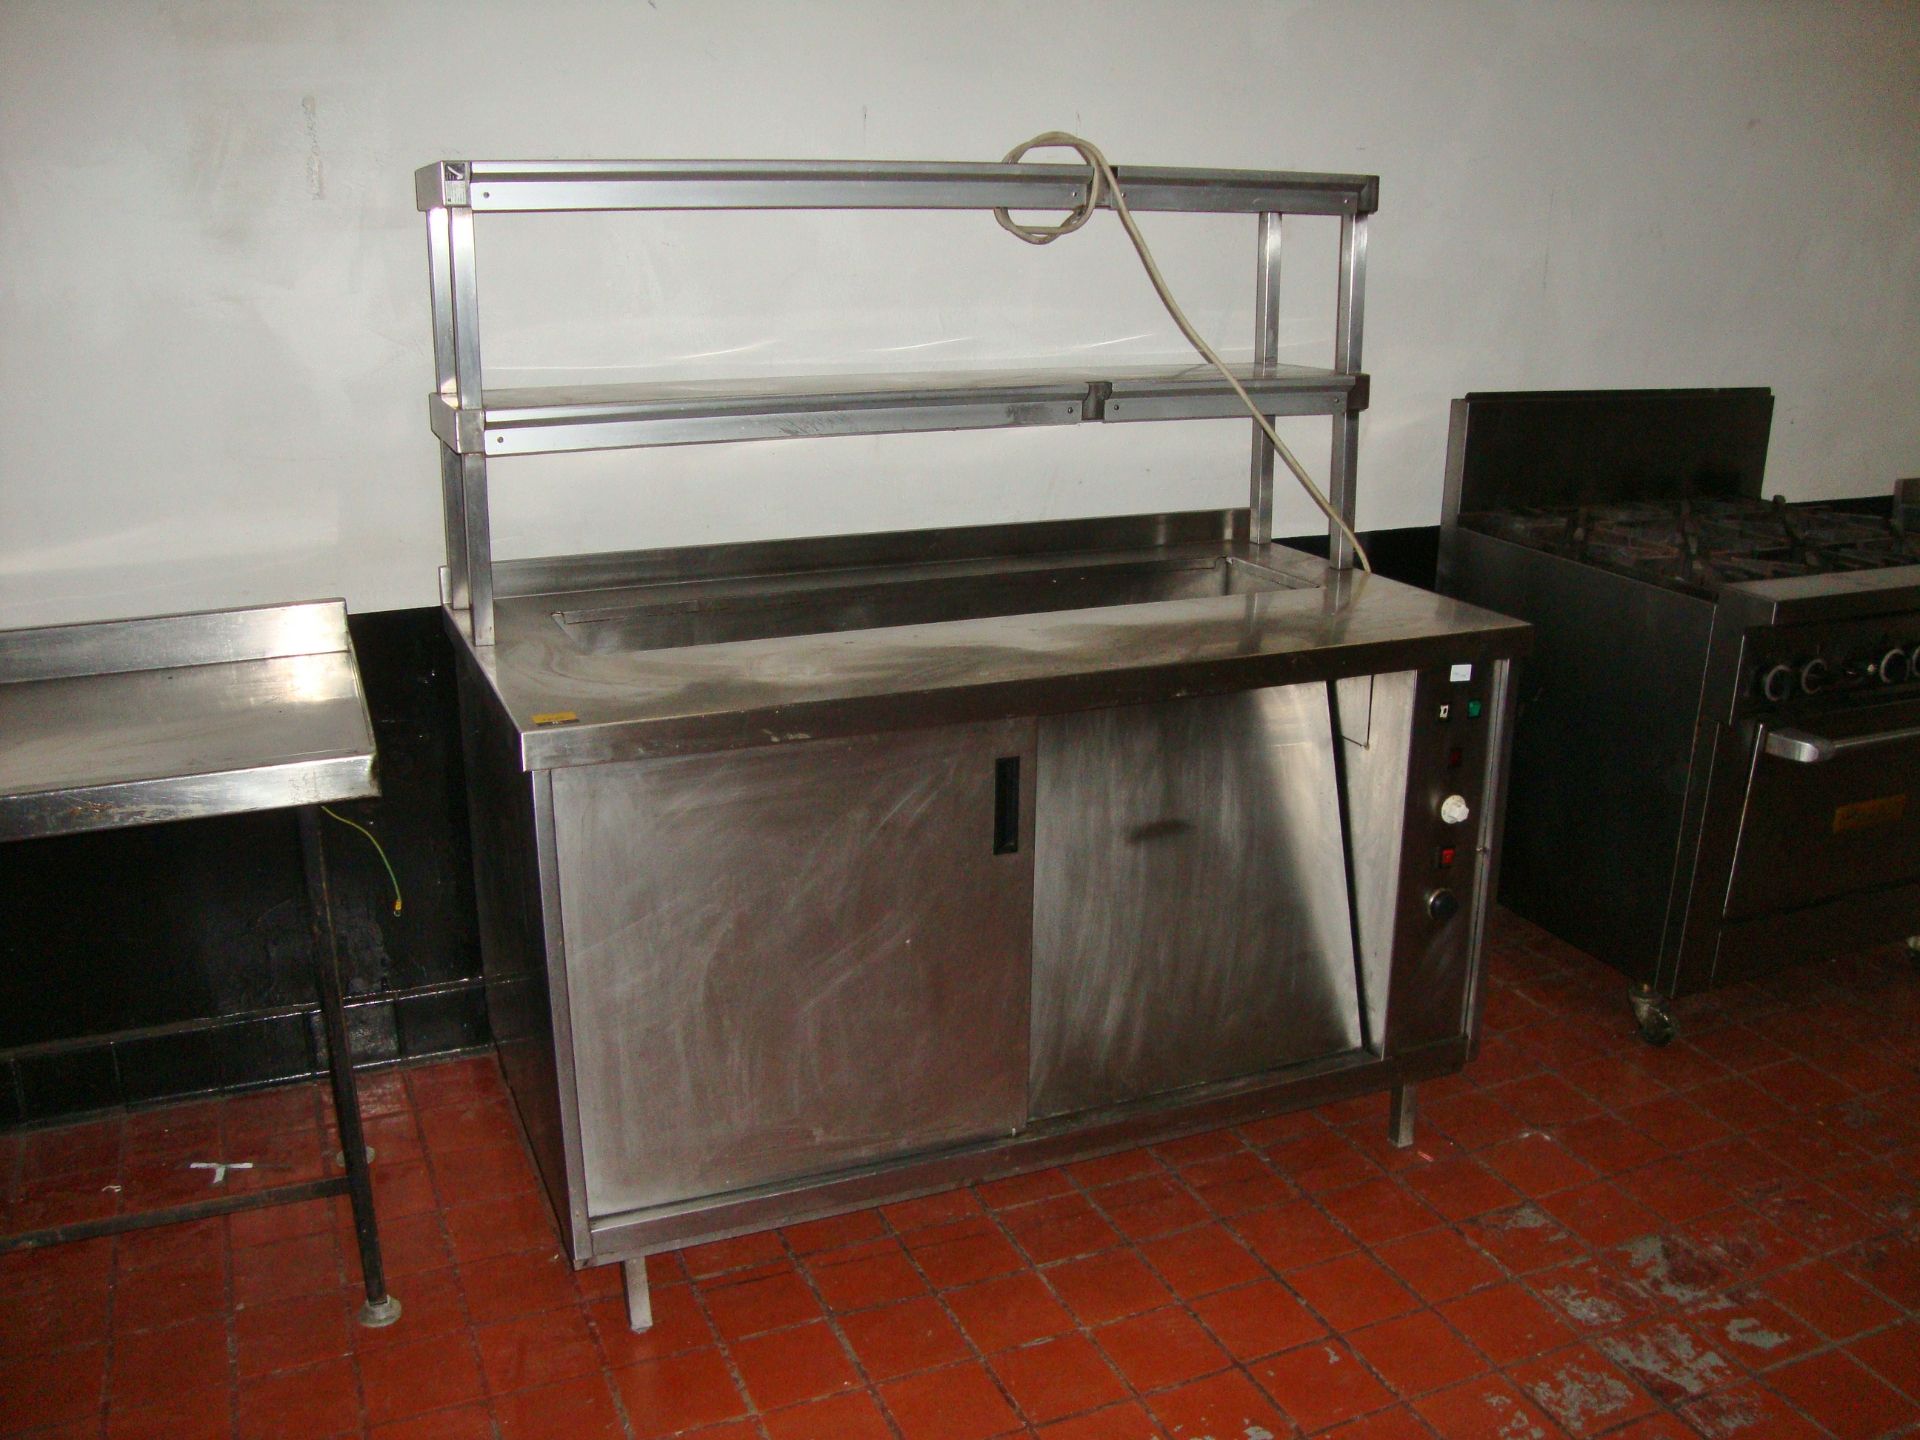 Stainless steel warming cupboard with bain marie section & illuminated serving shelves above, 59"